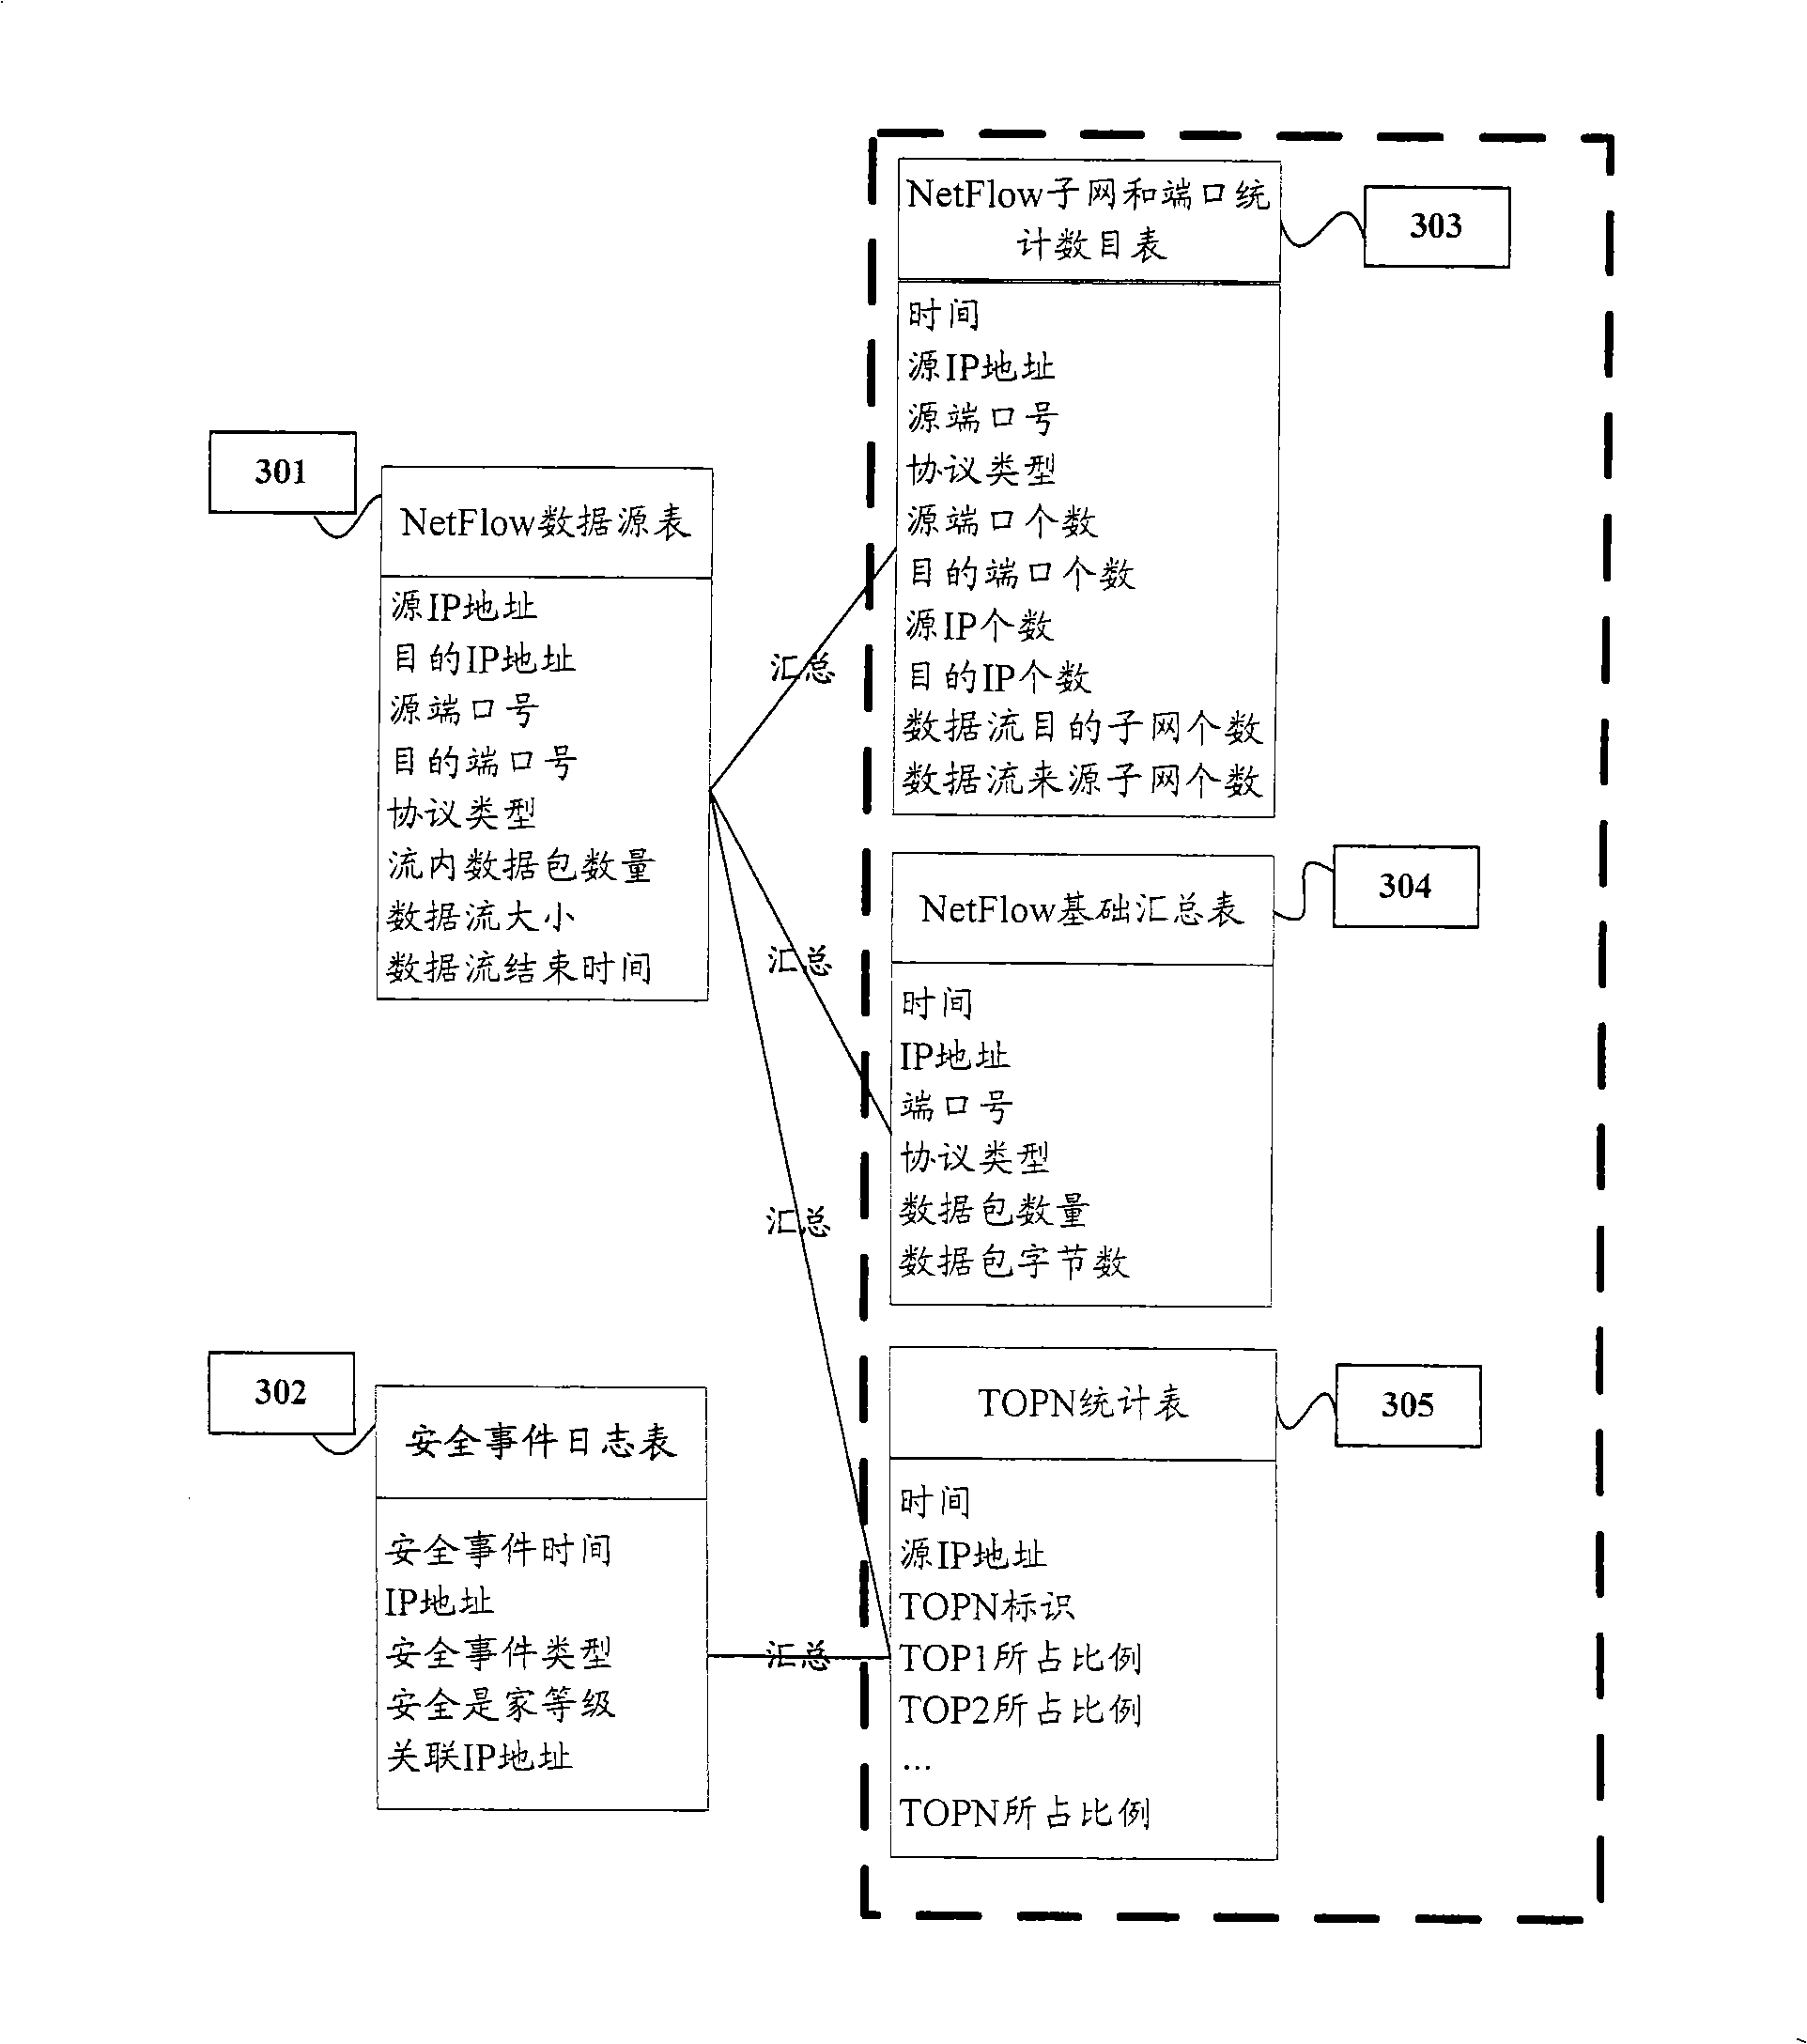 Method and apparatus for confirming user behavior